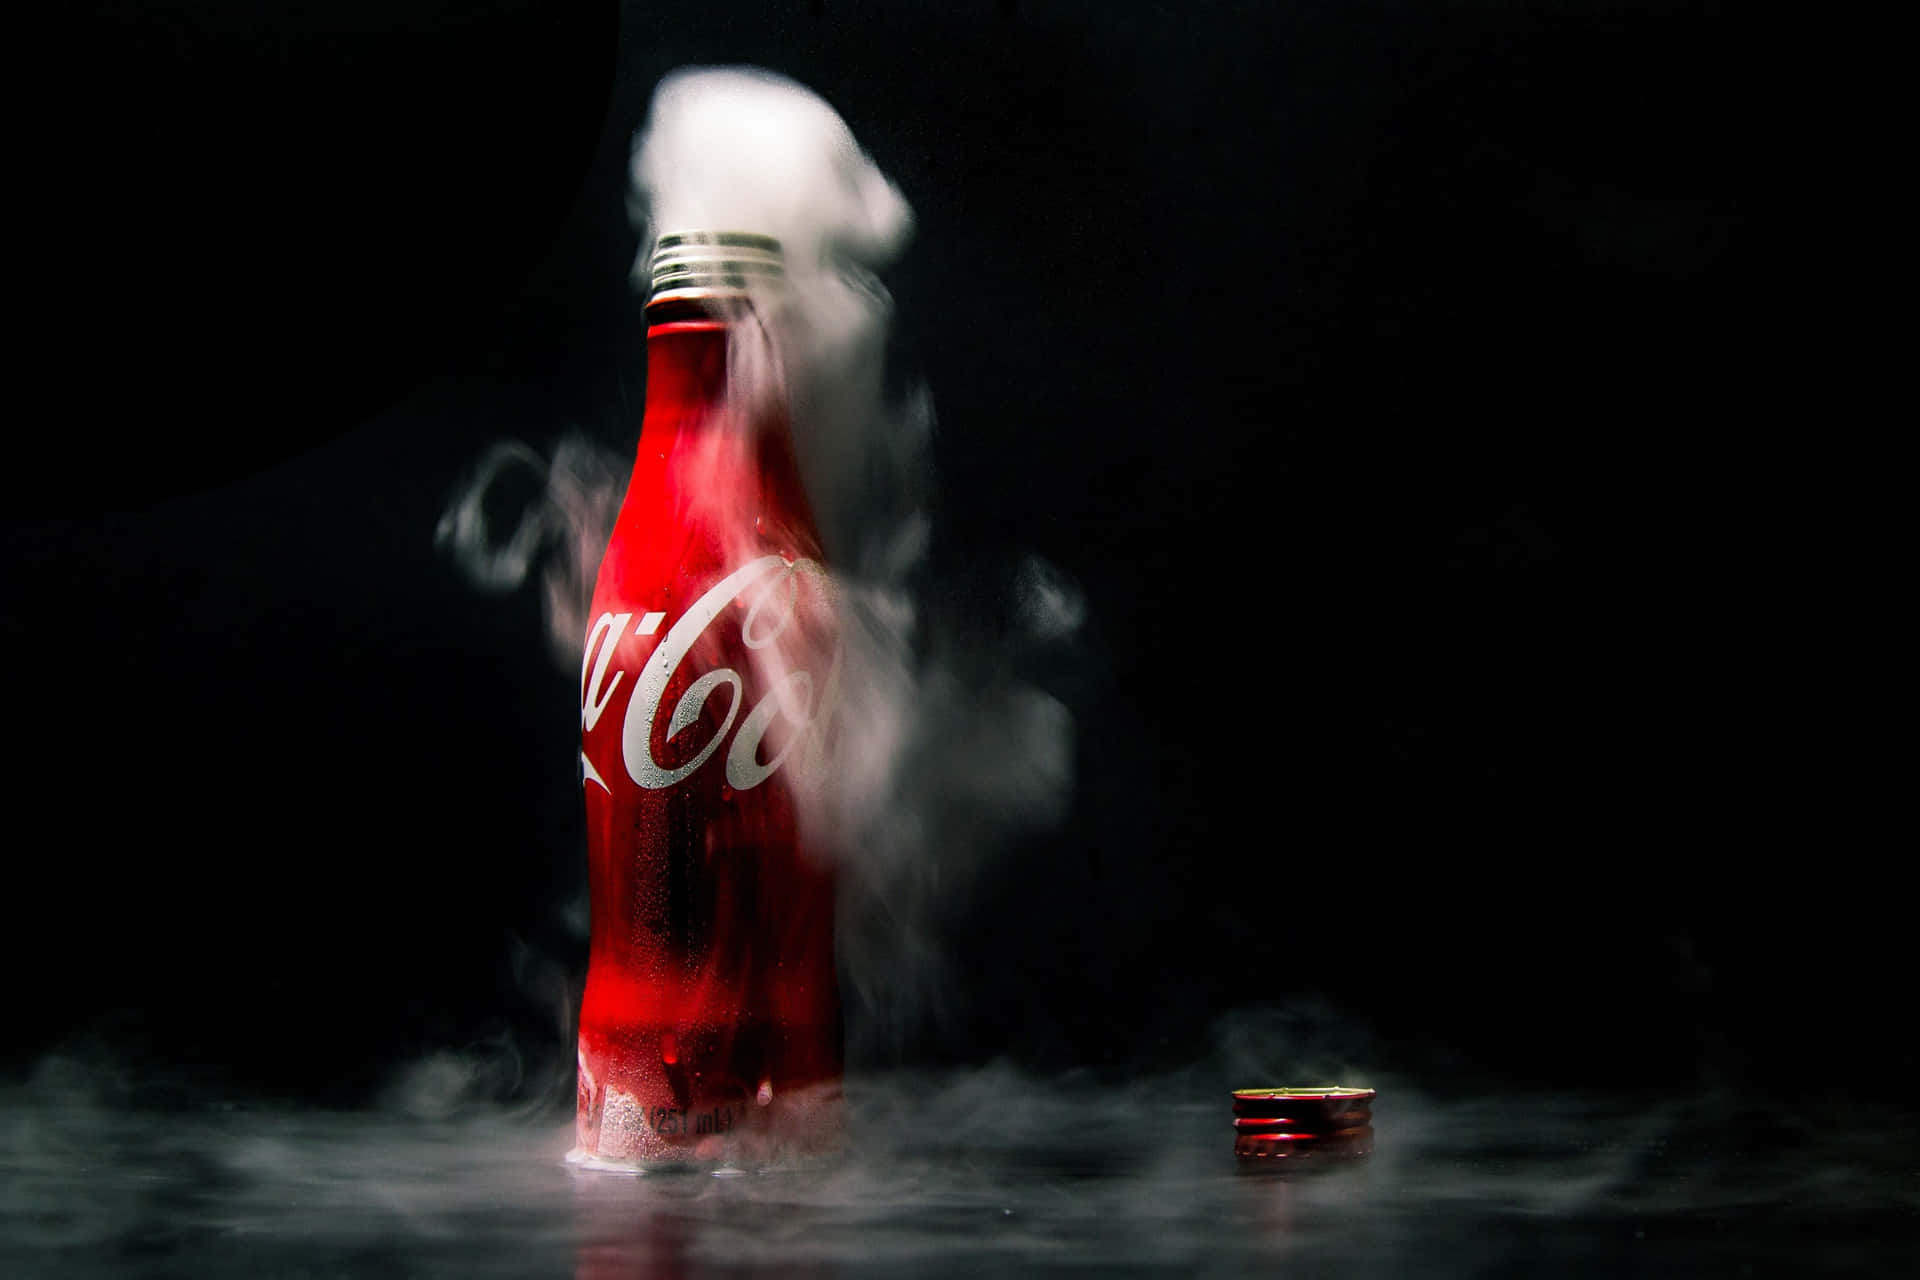 Refreshing Bottle of Coca-Cola Against a Red Background